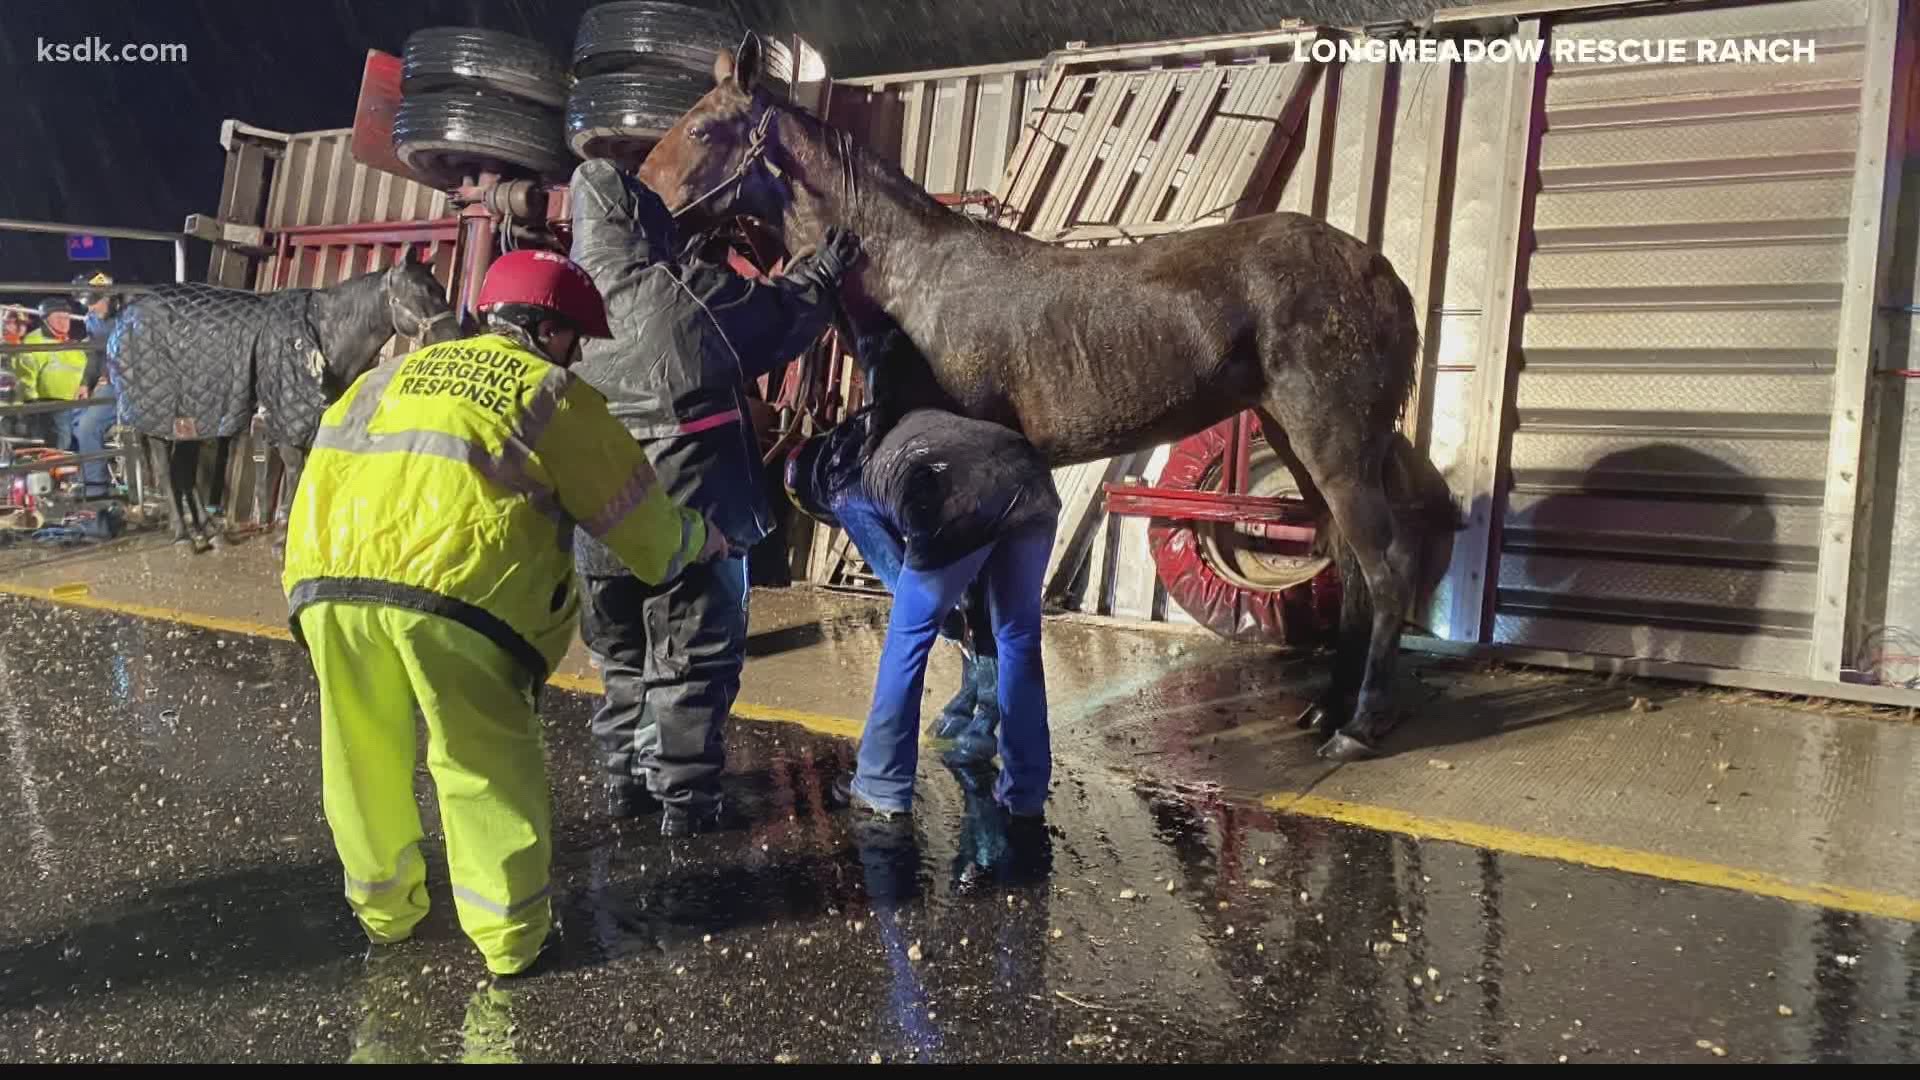 Members of the Missouri Emergency Response Service and the Longmeadow Rescue ranch worked all night in the rain and cold to rescue the animals